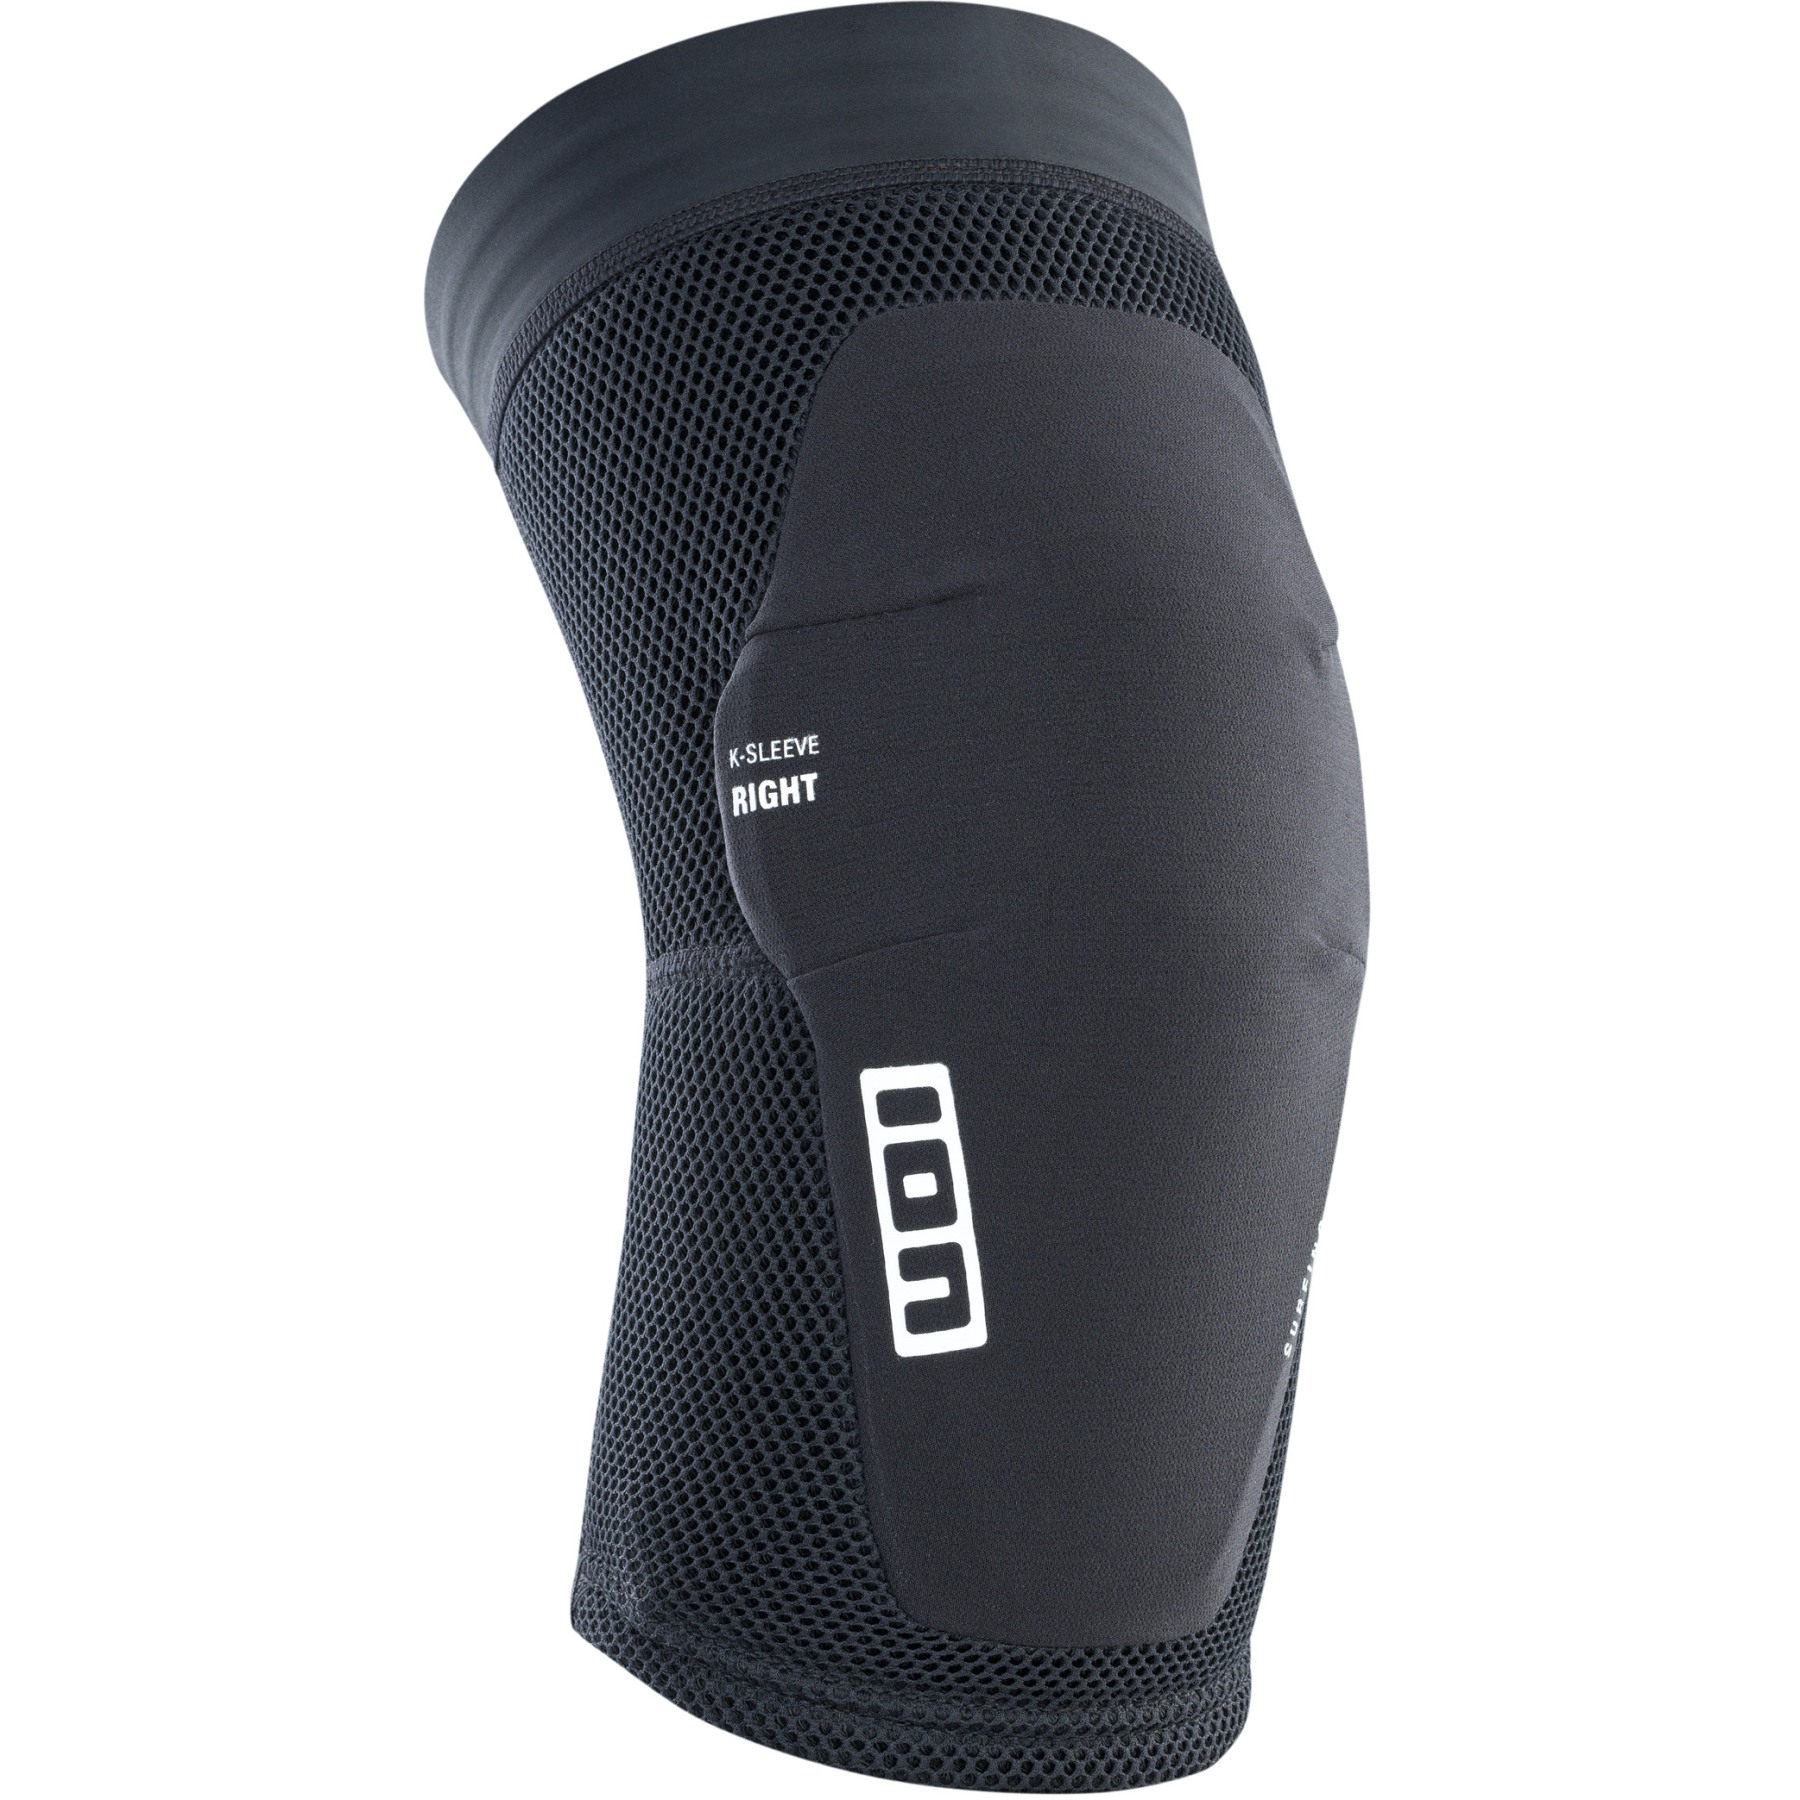 Picture of ION Bike Protection K-Sleeve Knee Pads - Black